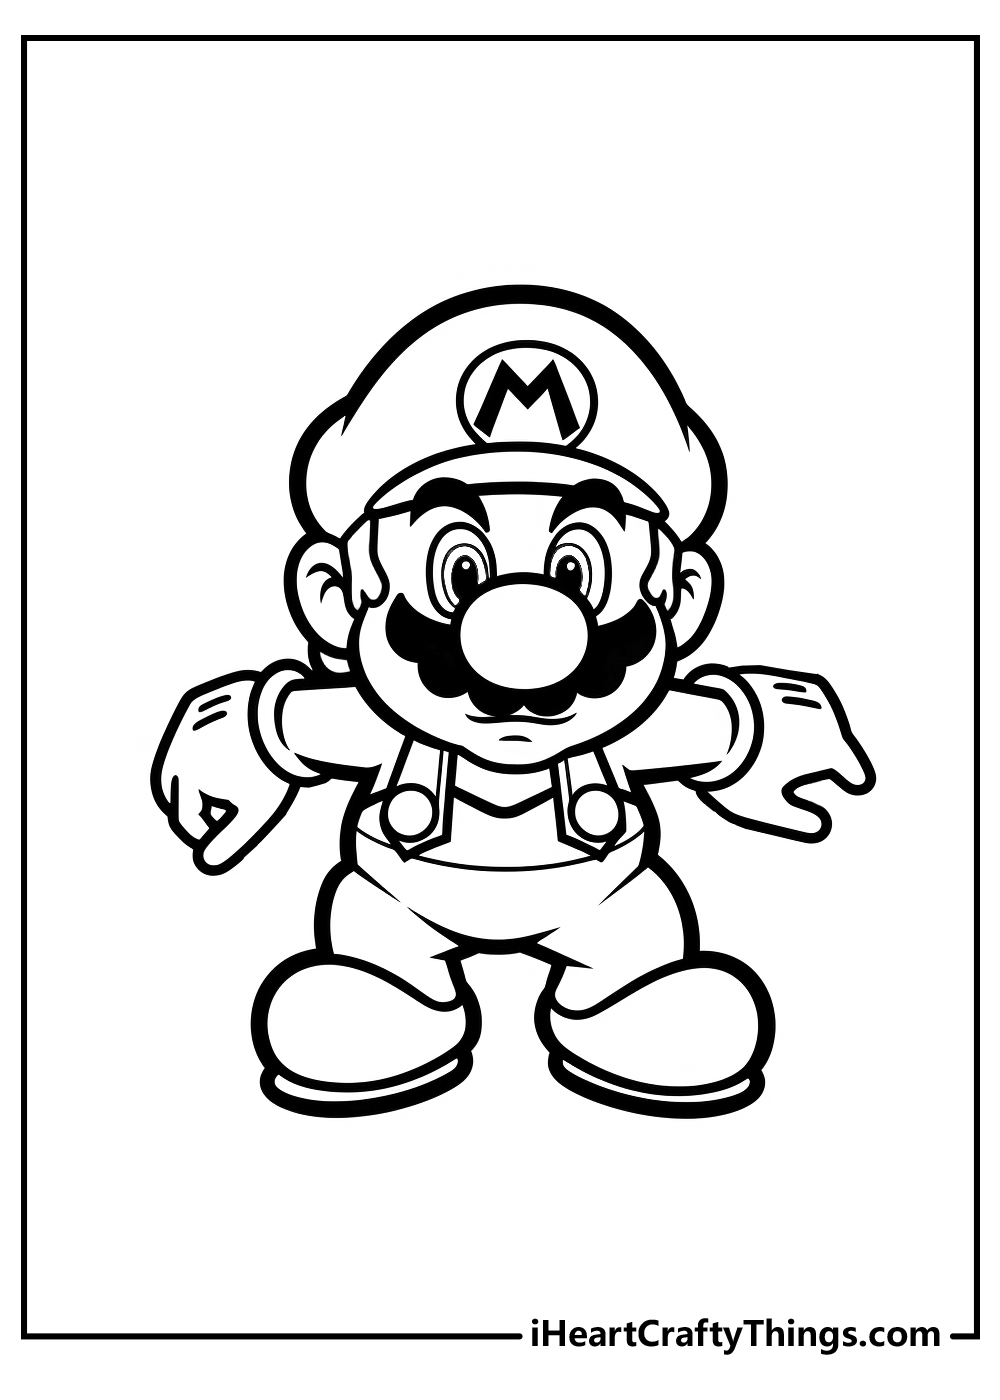 Printable Mario Coloring Pages Collection: The Perfect Gift for Young Gamers